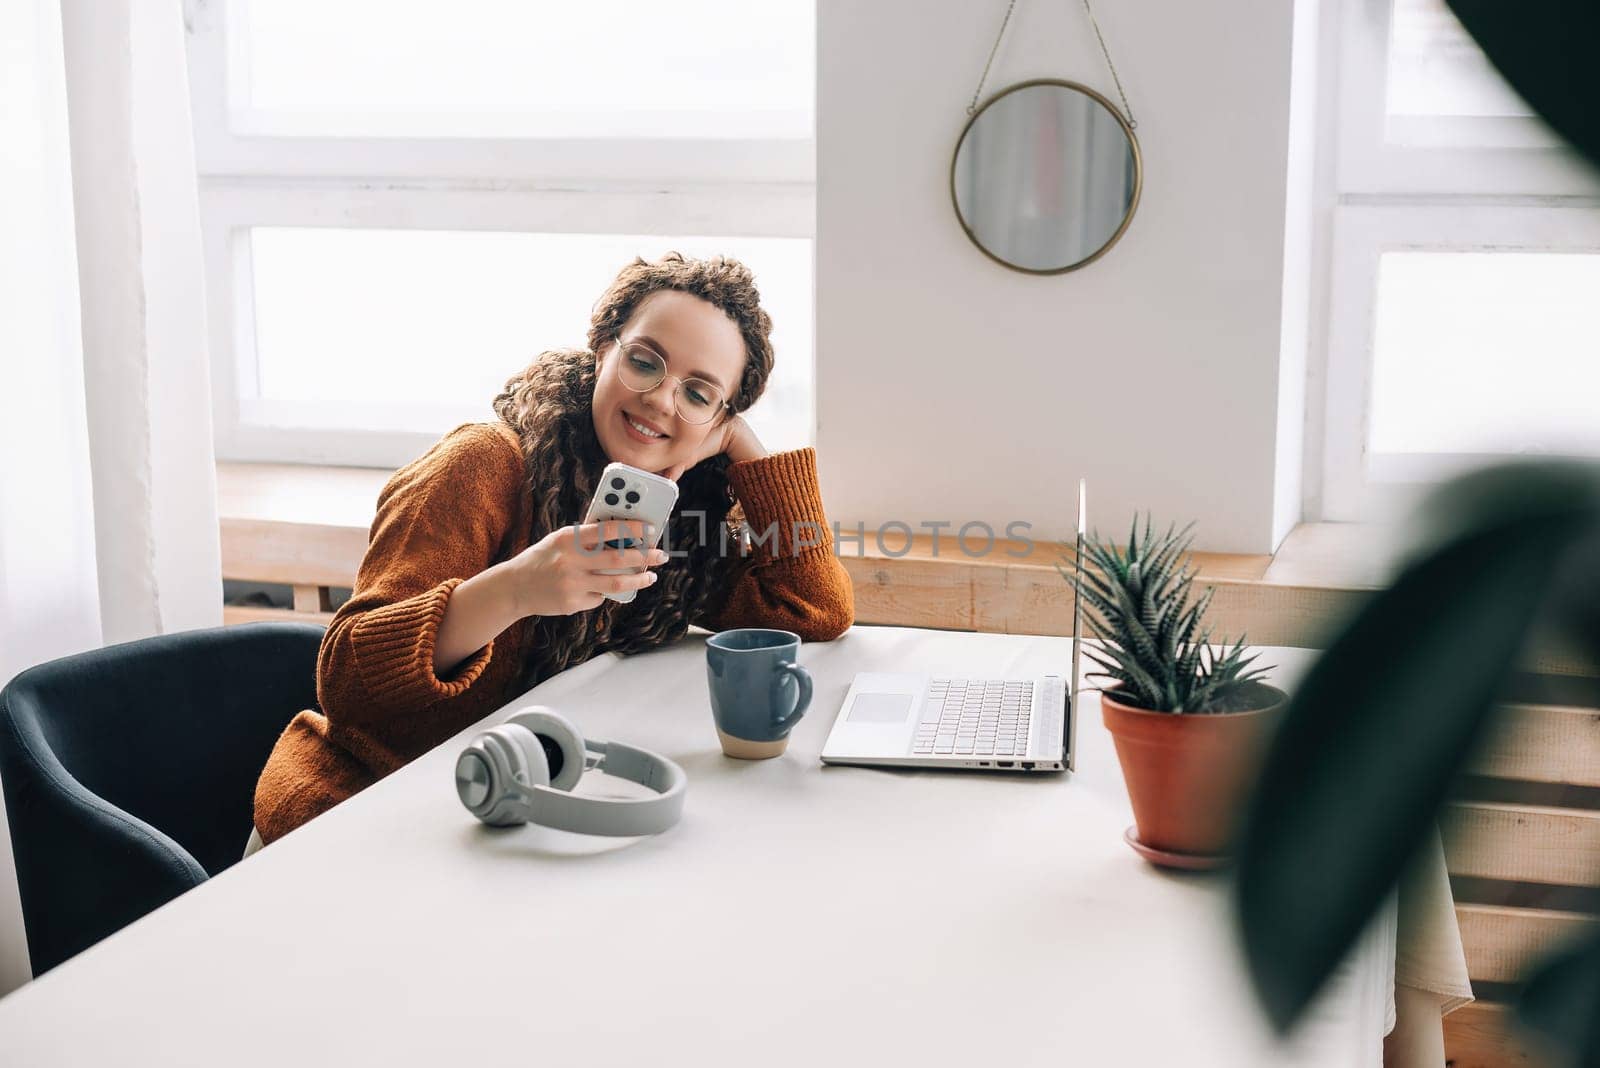 Young happy smiling pretty woman sitting on chair holding smartphone using cell phone mobile technology, looking at mobile phone while remote working or learning, texting messages at home office.